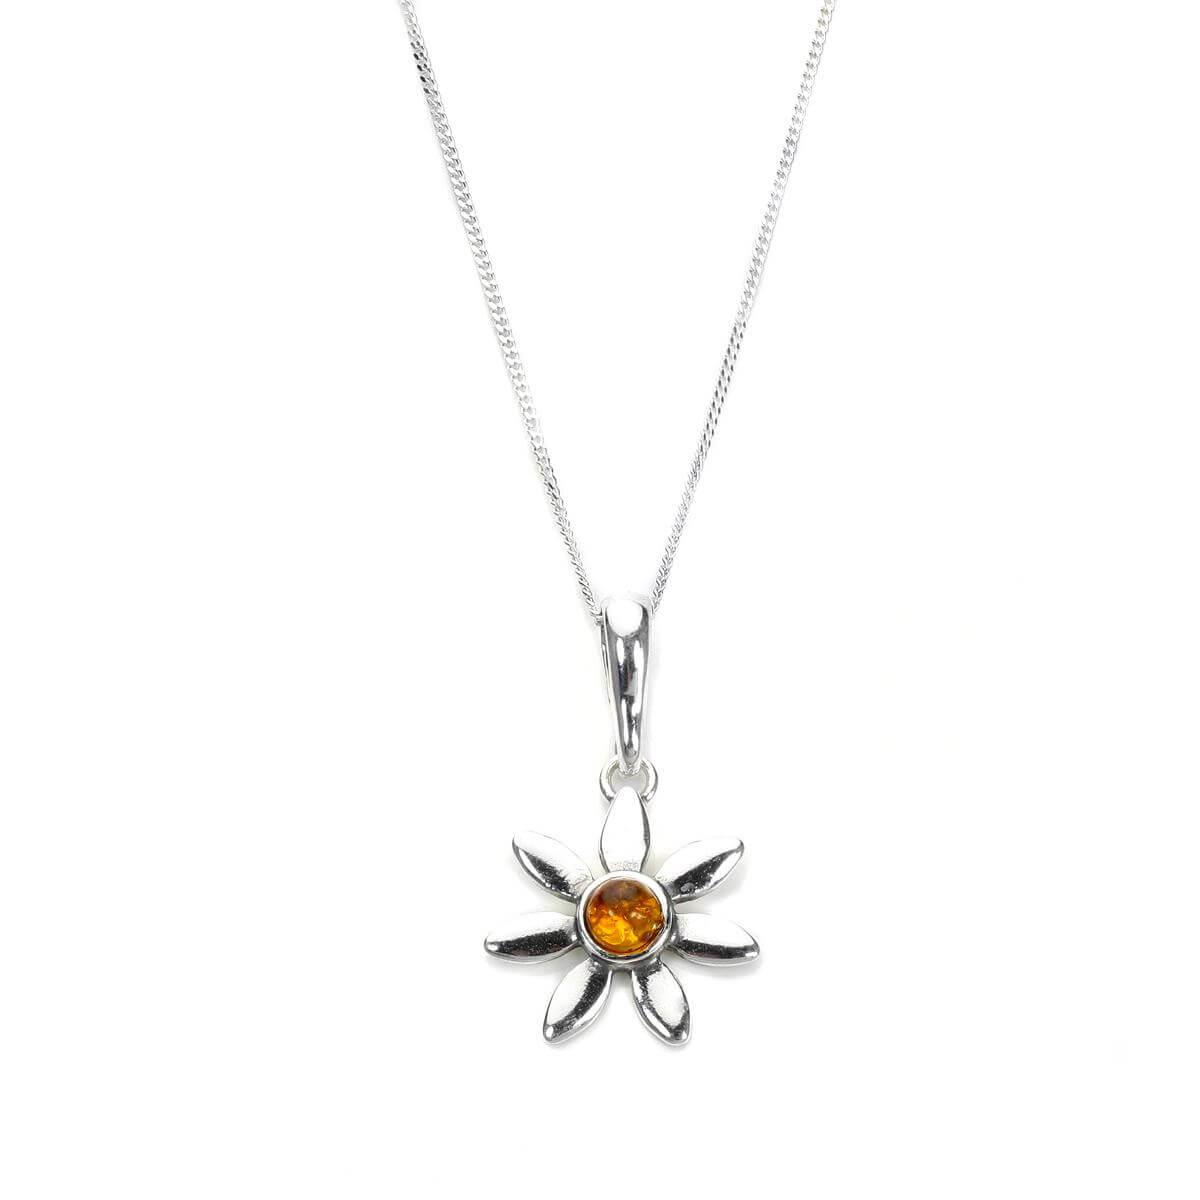 Sterling Silver & Baltic Amber Flower Pendant - 16 - 22 Inches